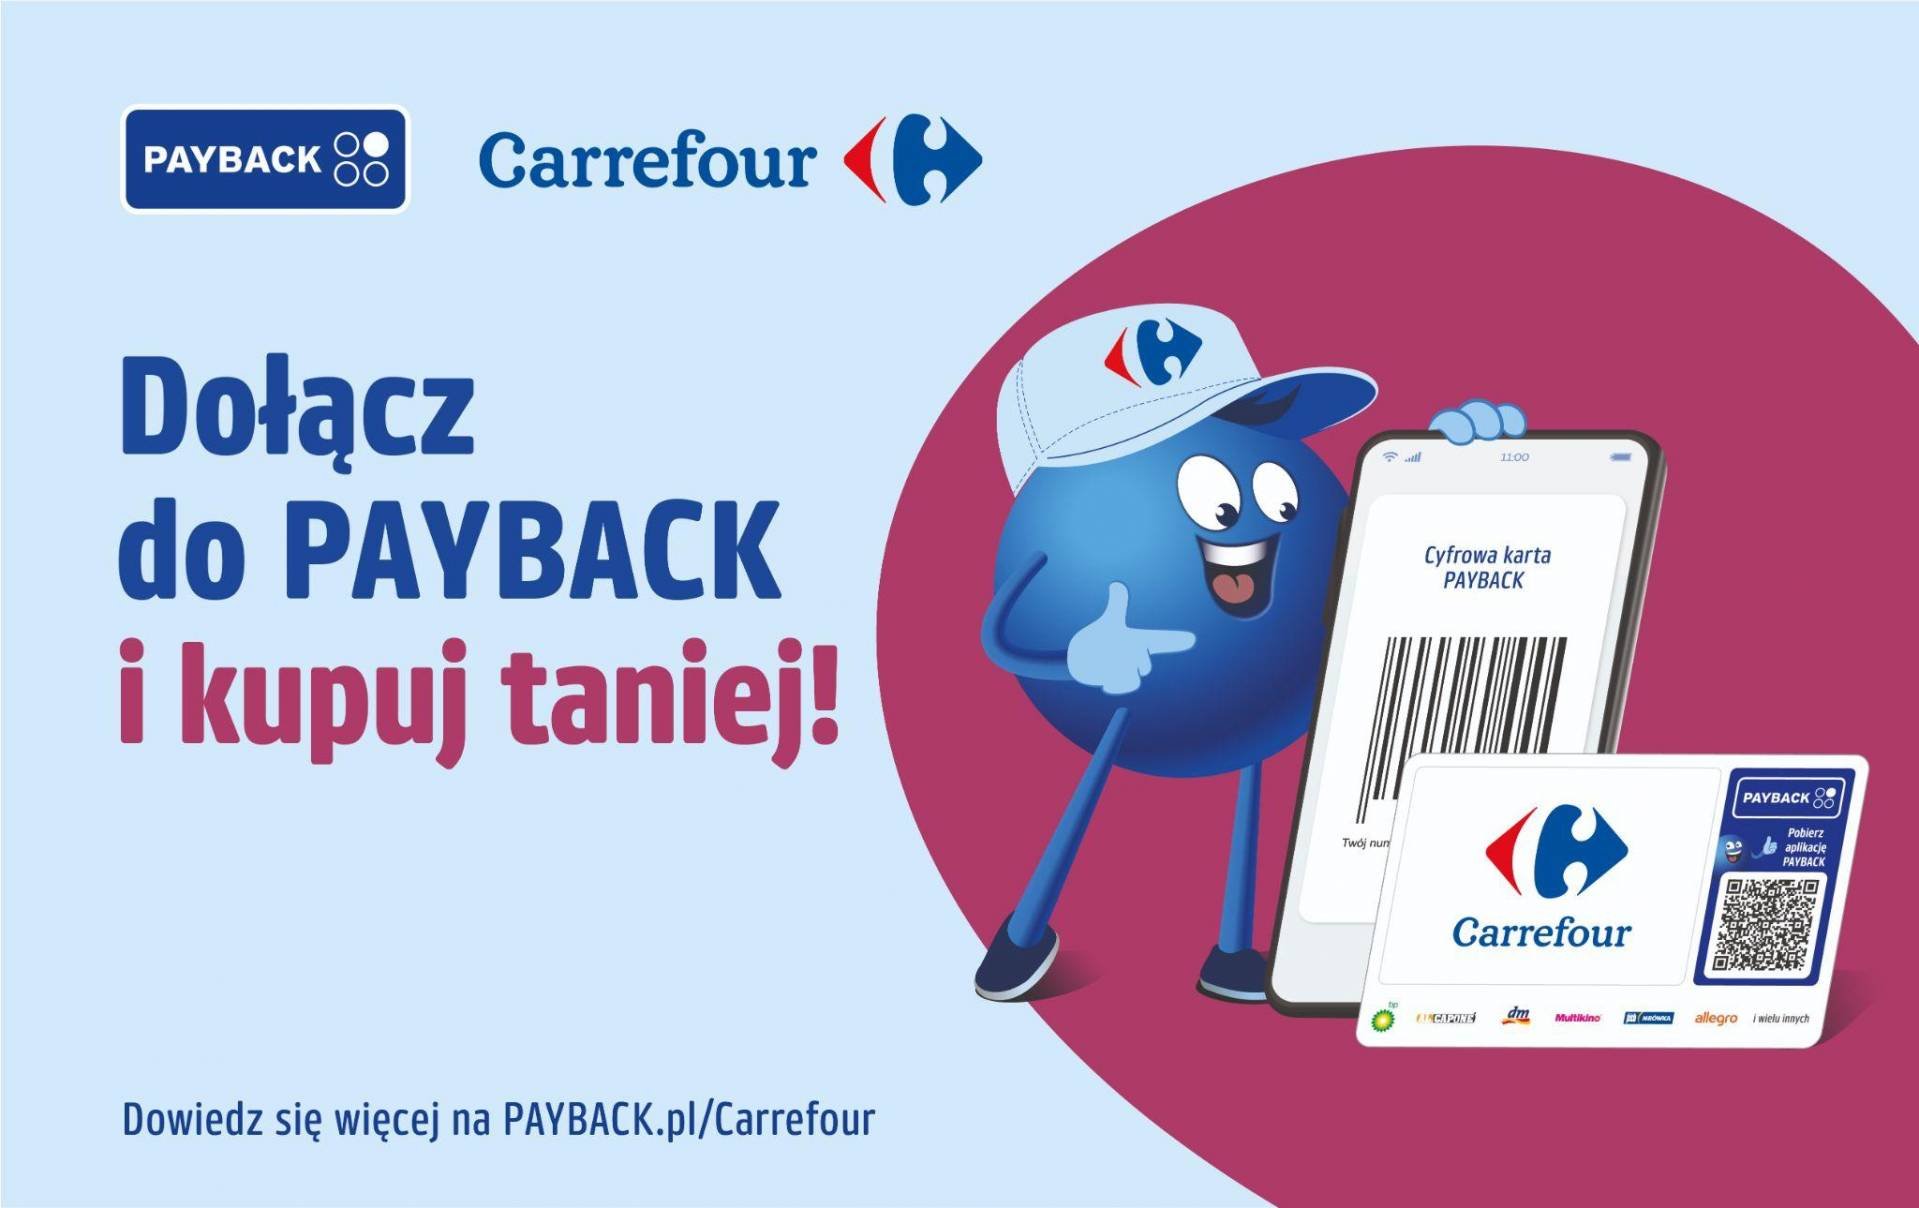 PAYBACK at Carrefour